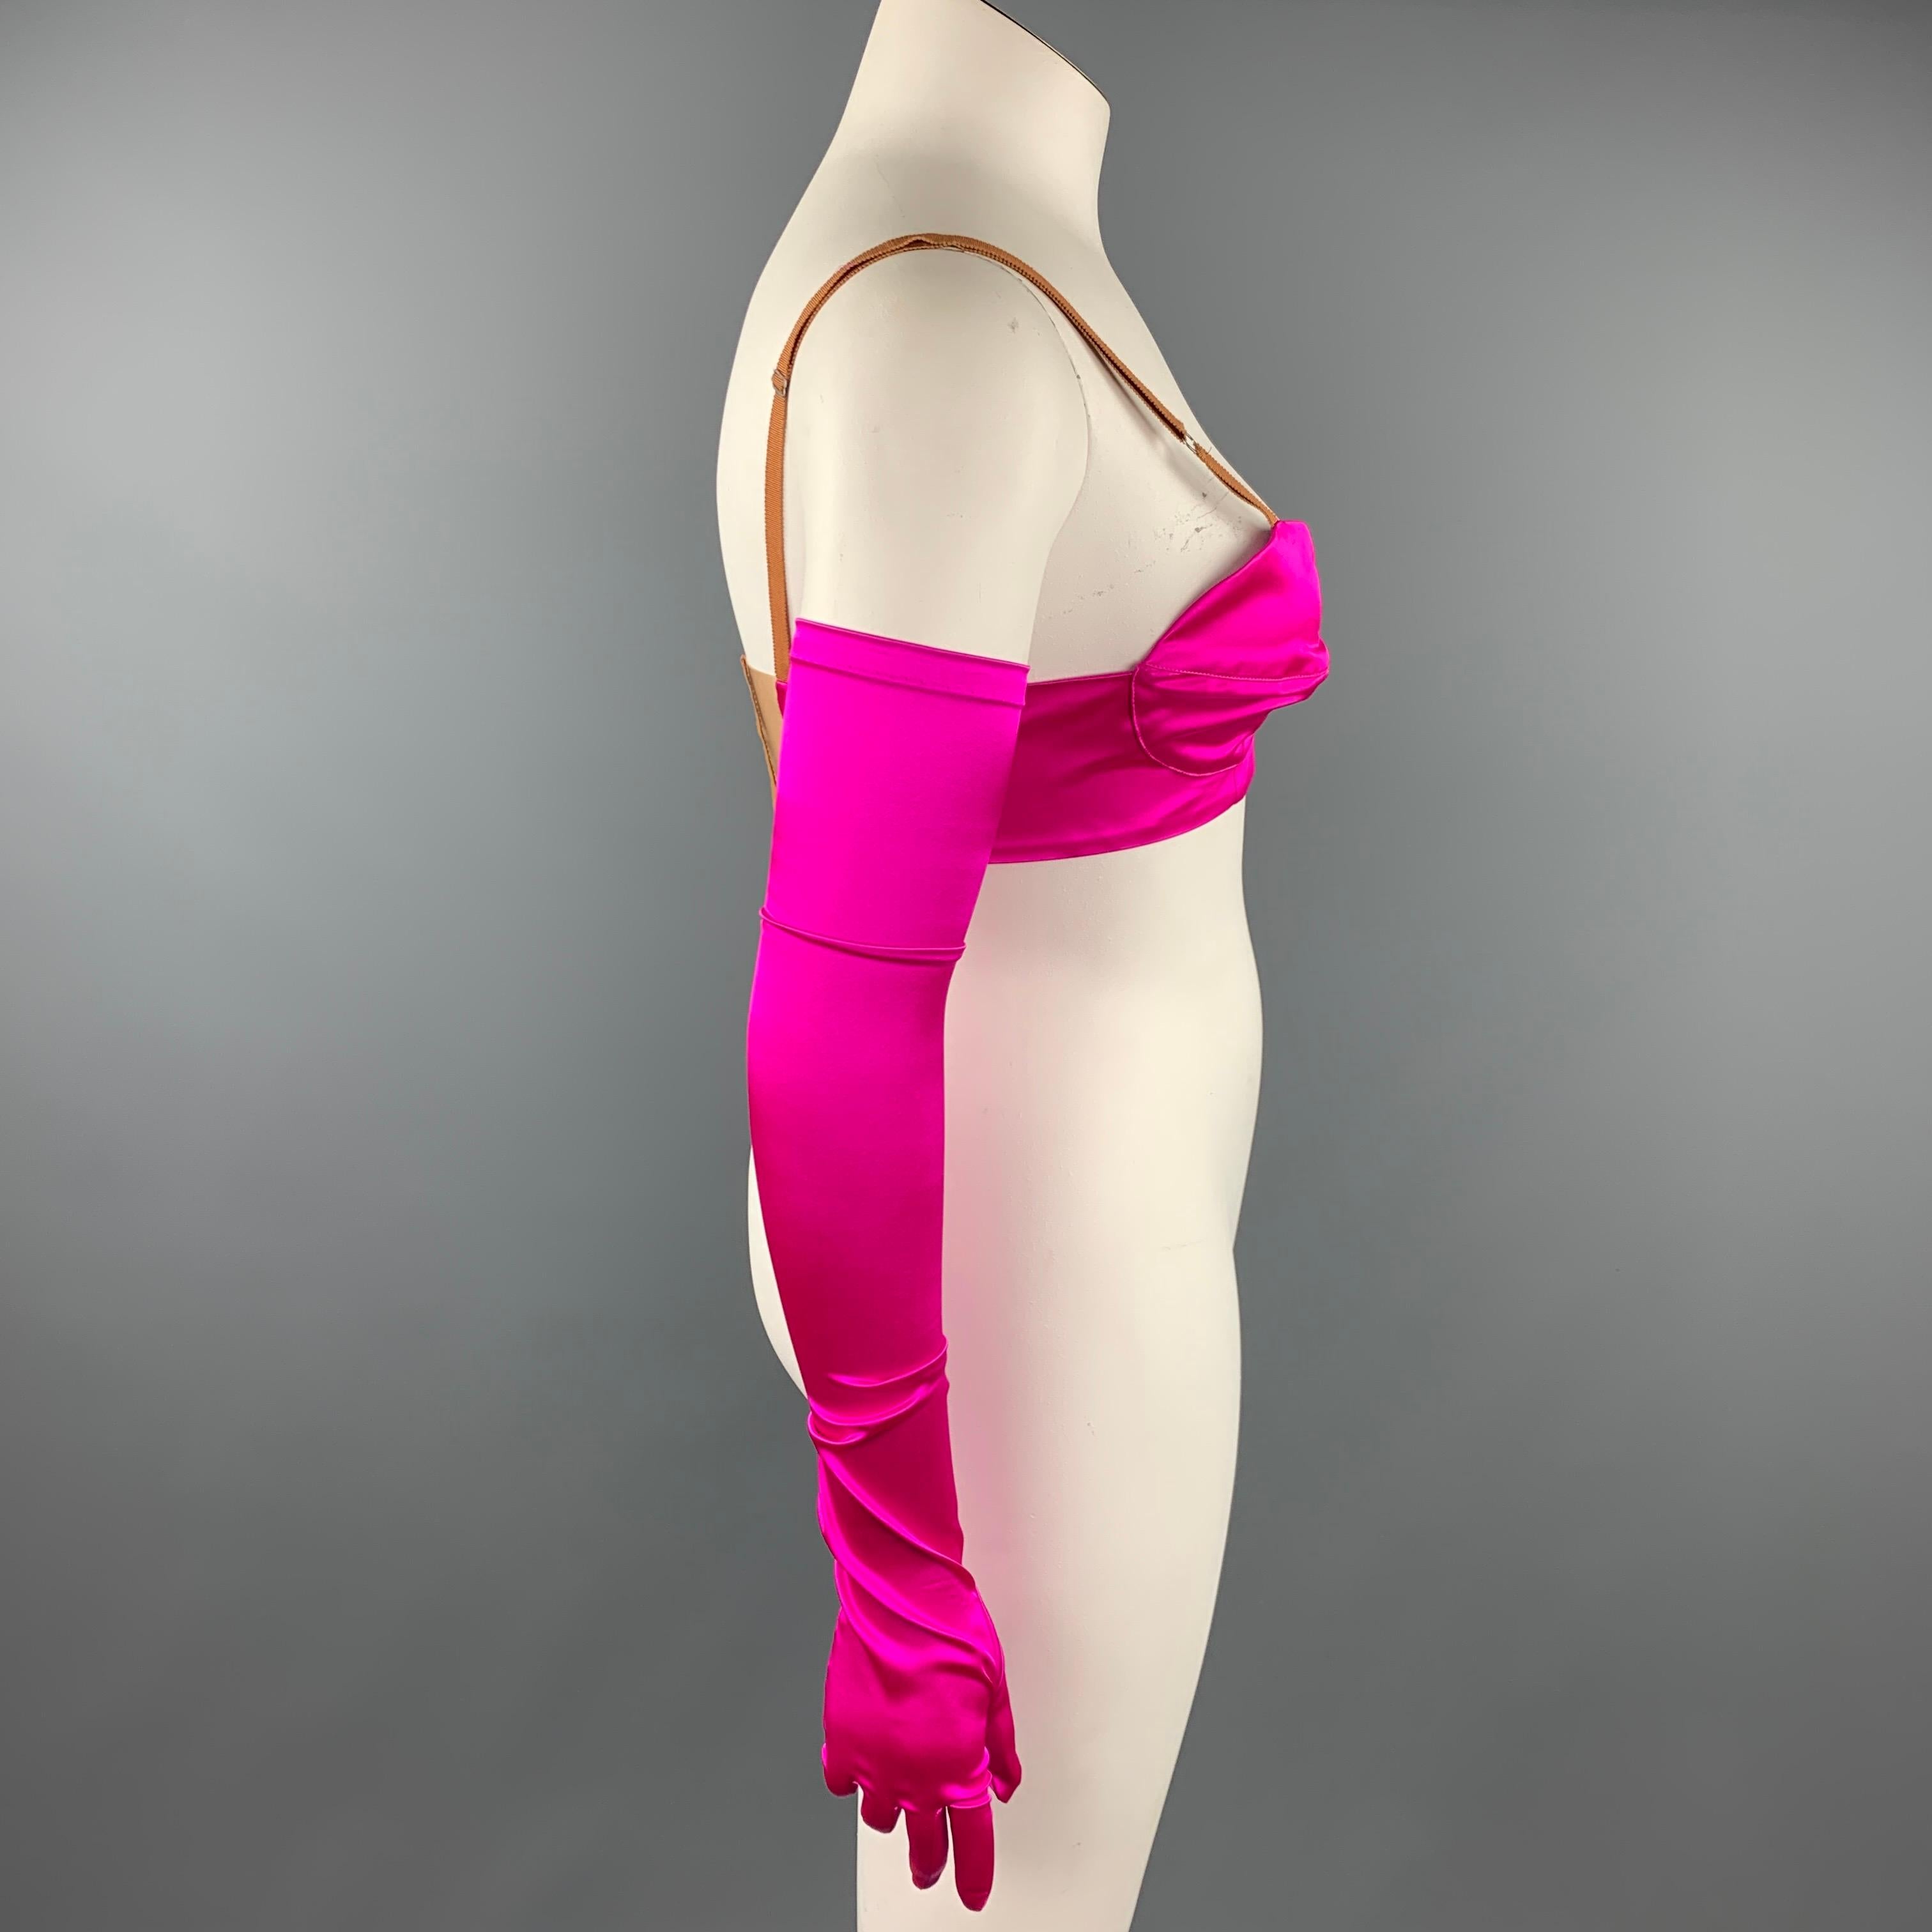 DRIES VAN NOTEN dress top comes in a fuchsia satin silk featuring adjustable spaghetti straps, back hook & loop closure, and matching opera gloves. Comes with tags. Made in Bulgaria.

Very Good Pre-Owned Condition.
Marked: 40
Gloves: One